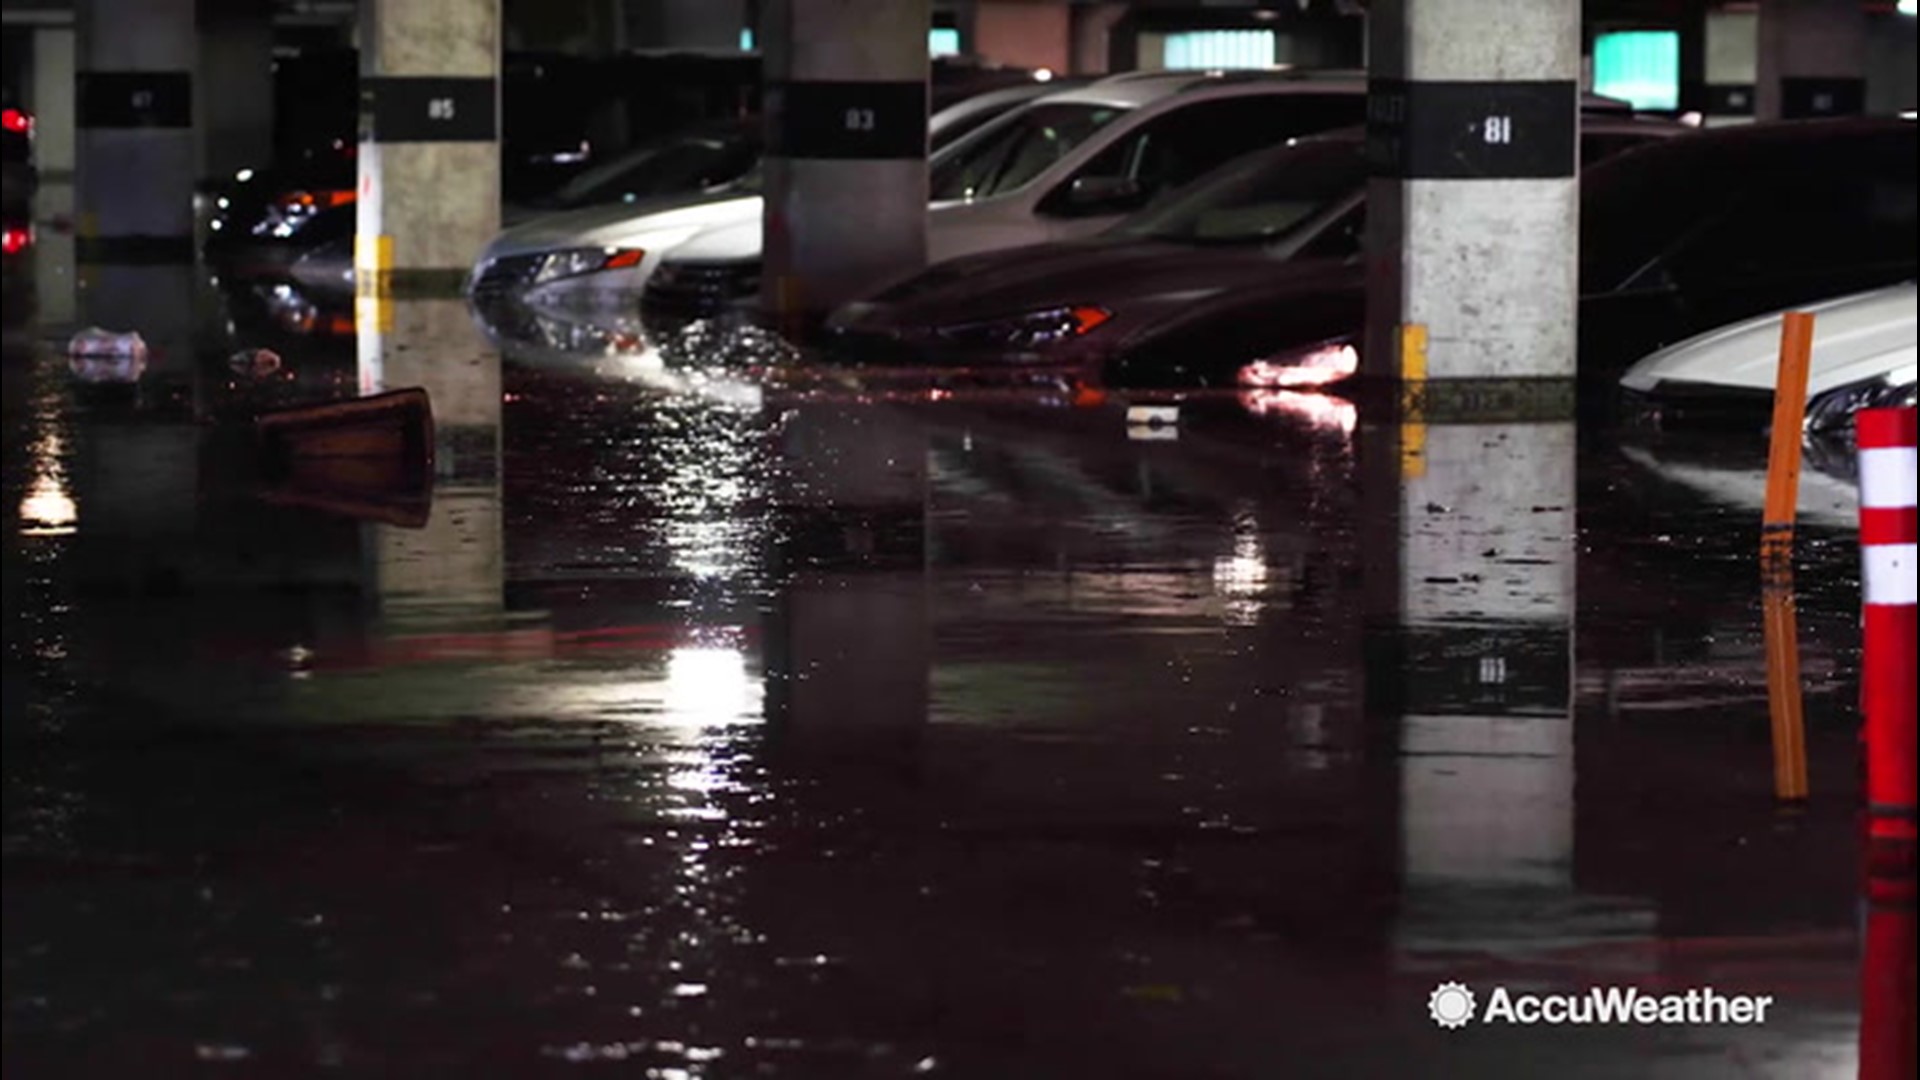 AccuWeather's own Jonathan Petramala was in St. Petersburgh, Florida when a powerful storm caused flash flooding, on August 1. Due to potential pump failures, this hotel car garage became filled with water.